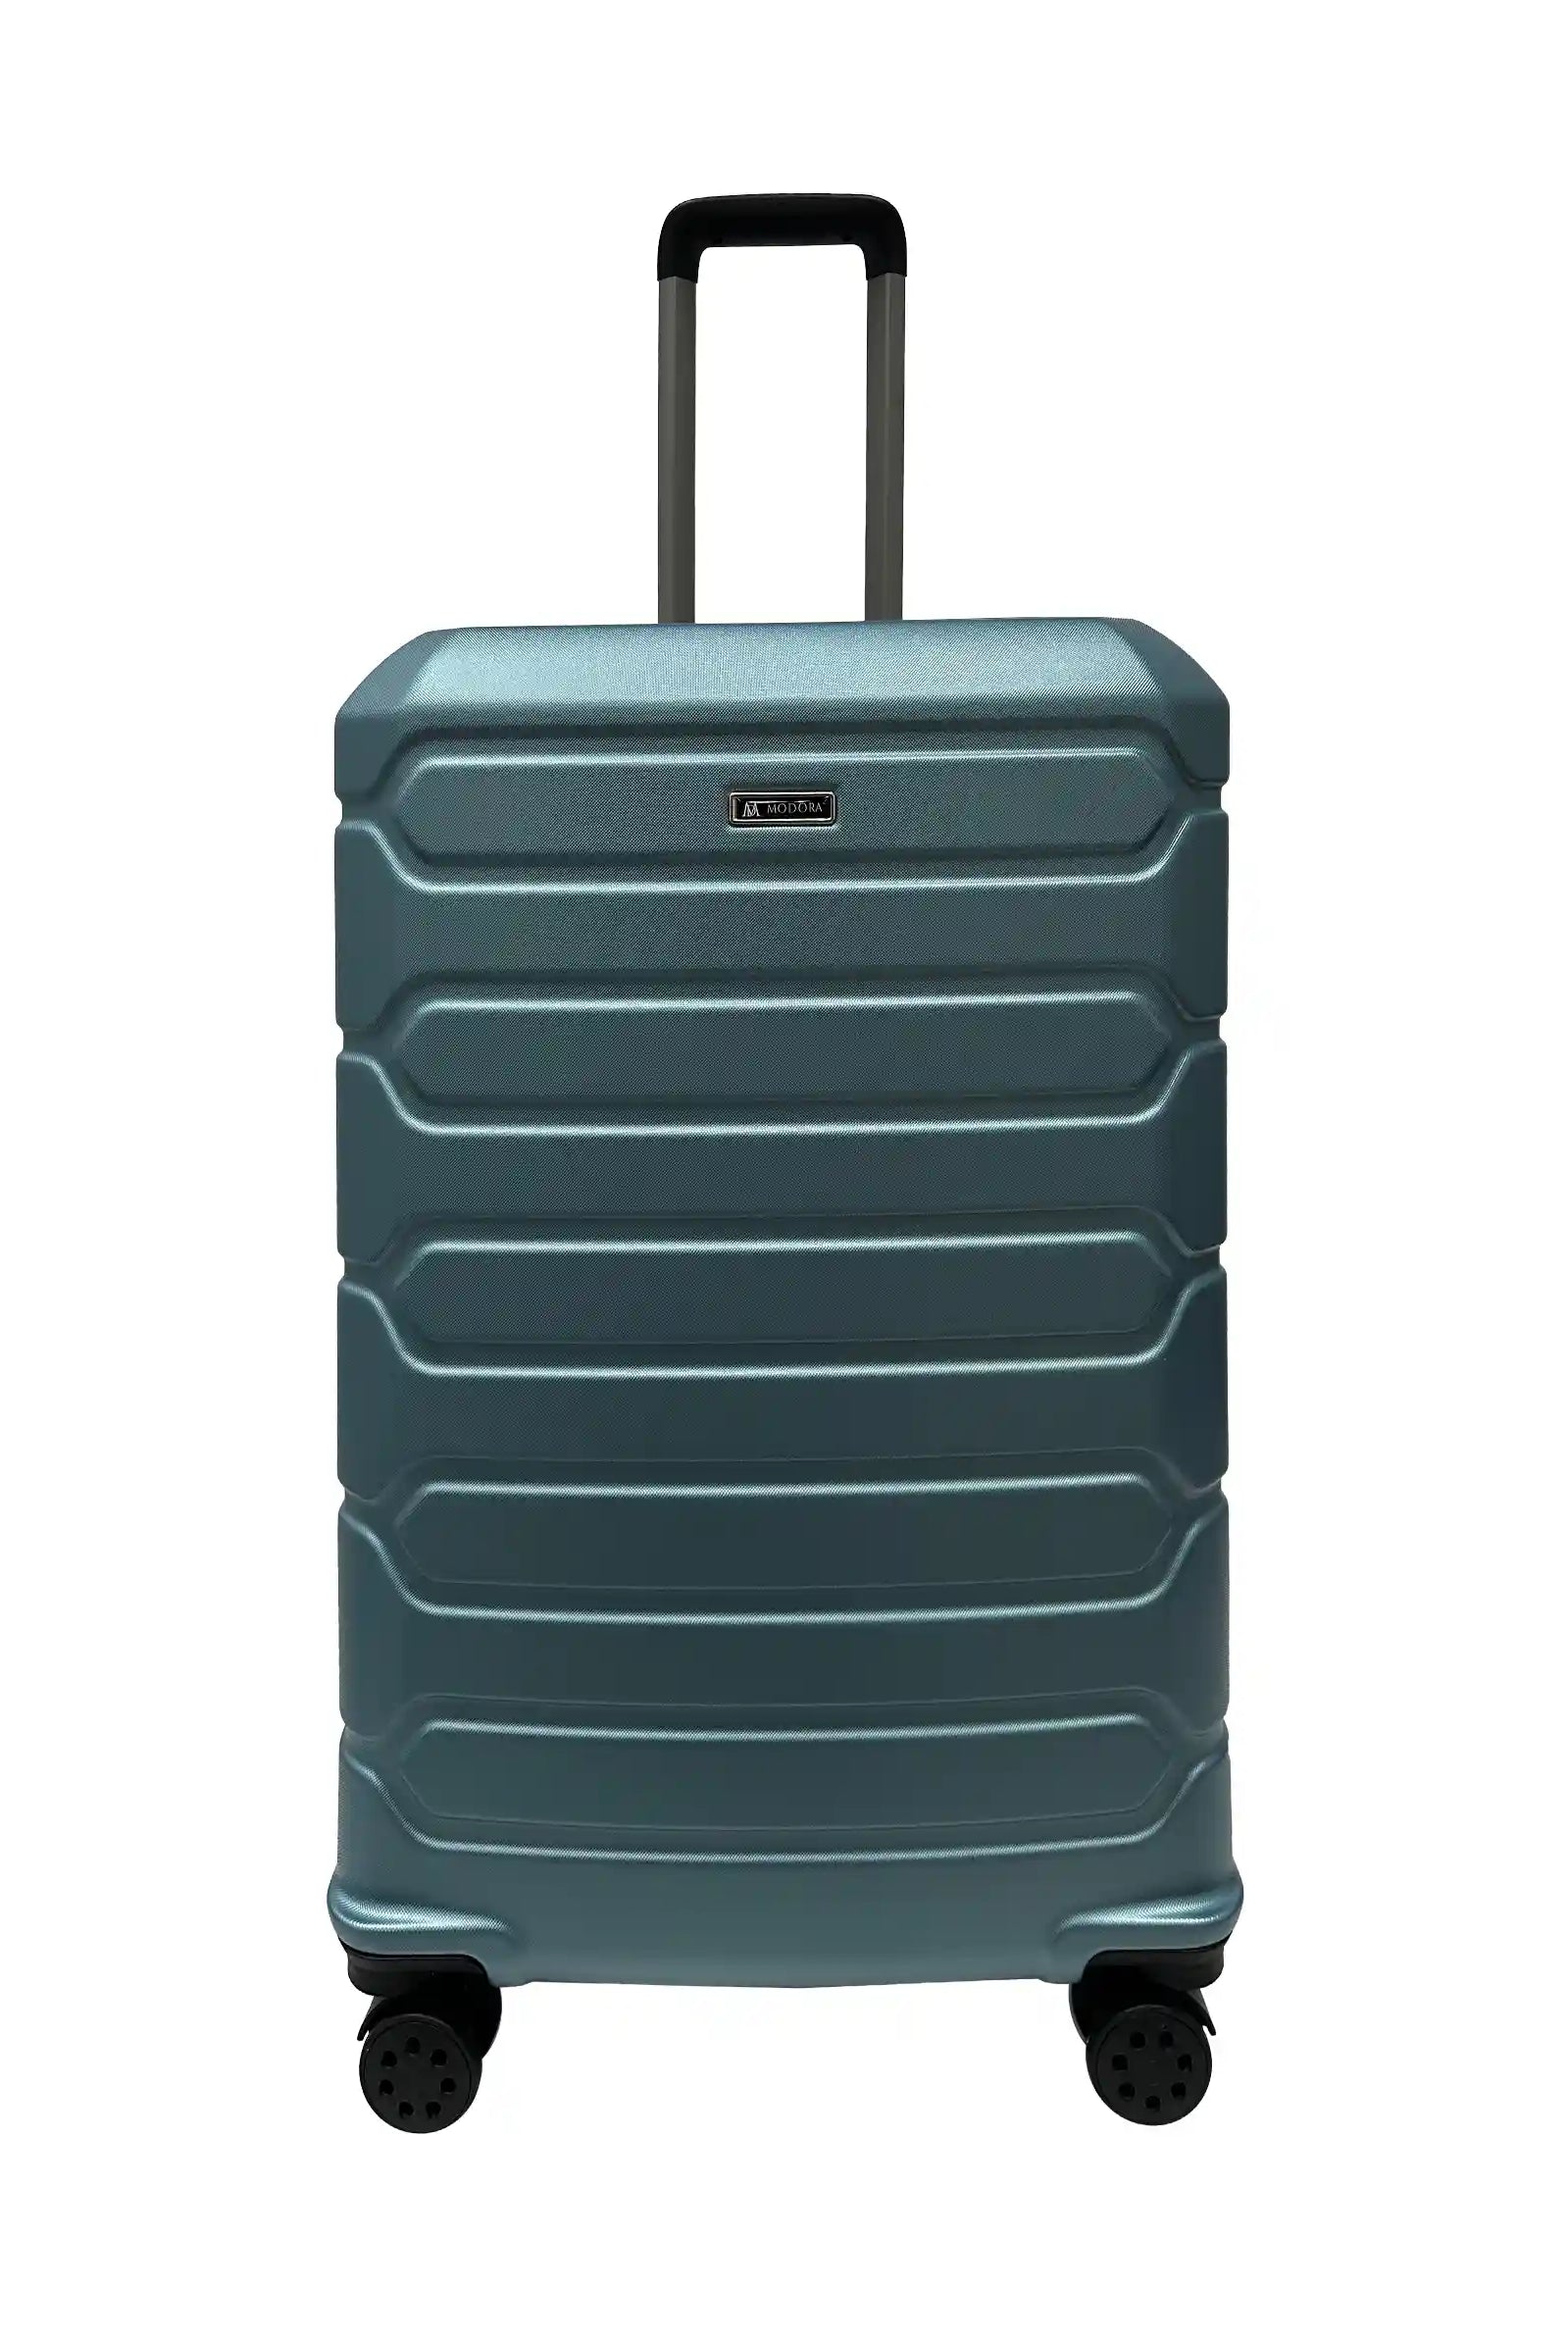 large green suitcase